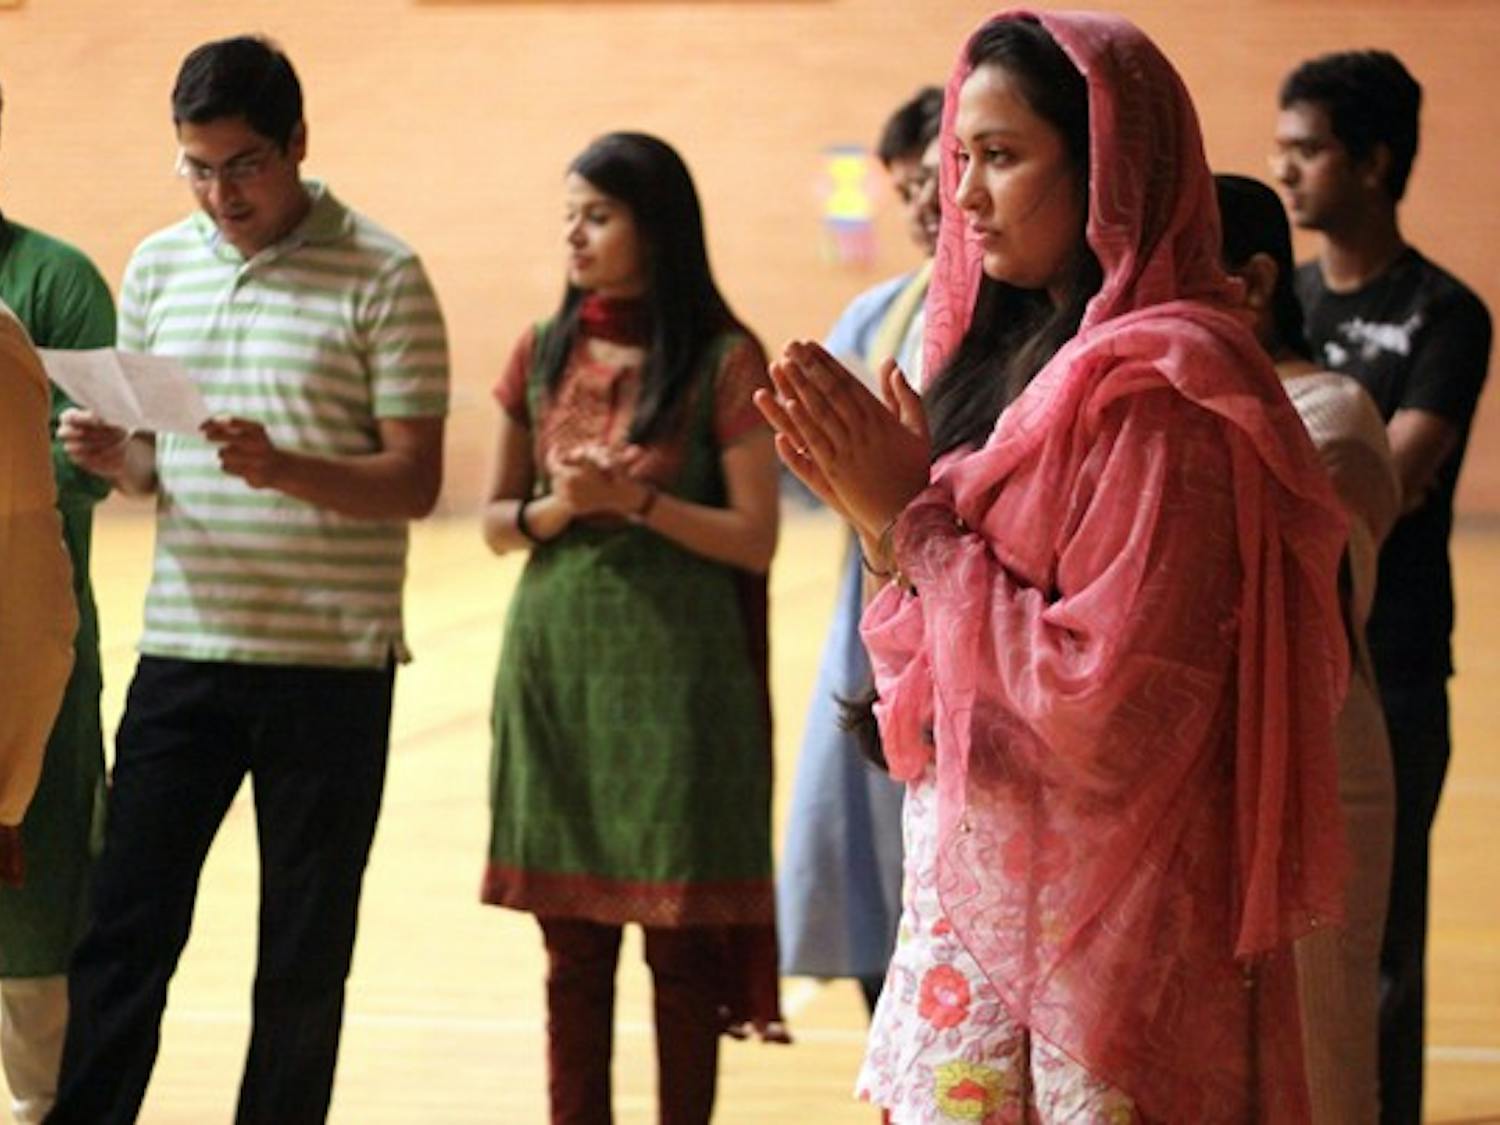 CELEBRATION: Gayatri Mahajan, a sophomore business law major, clasps her hands together during the Puja prayer that started off the evening celebrations. (Photo by Lillian Reid)